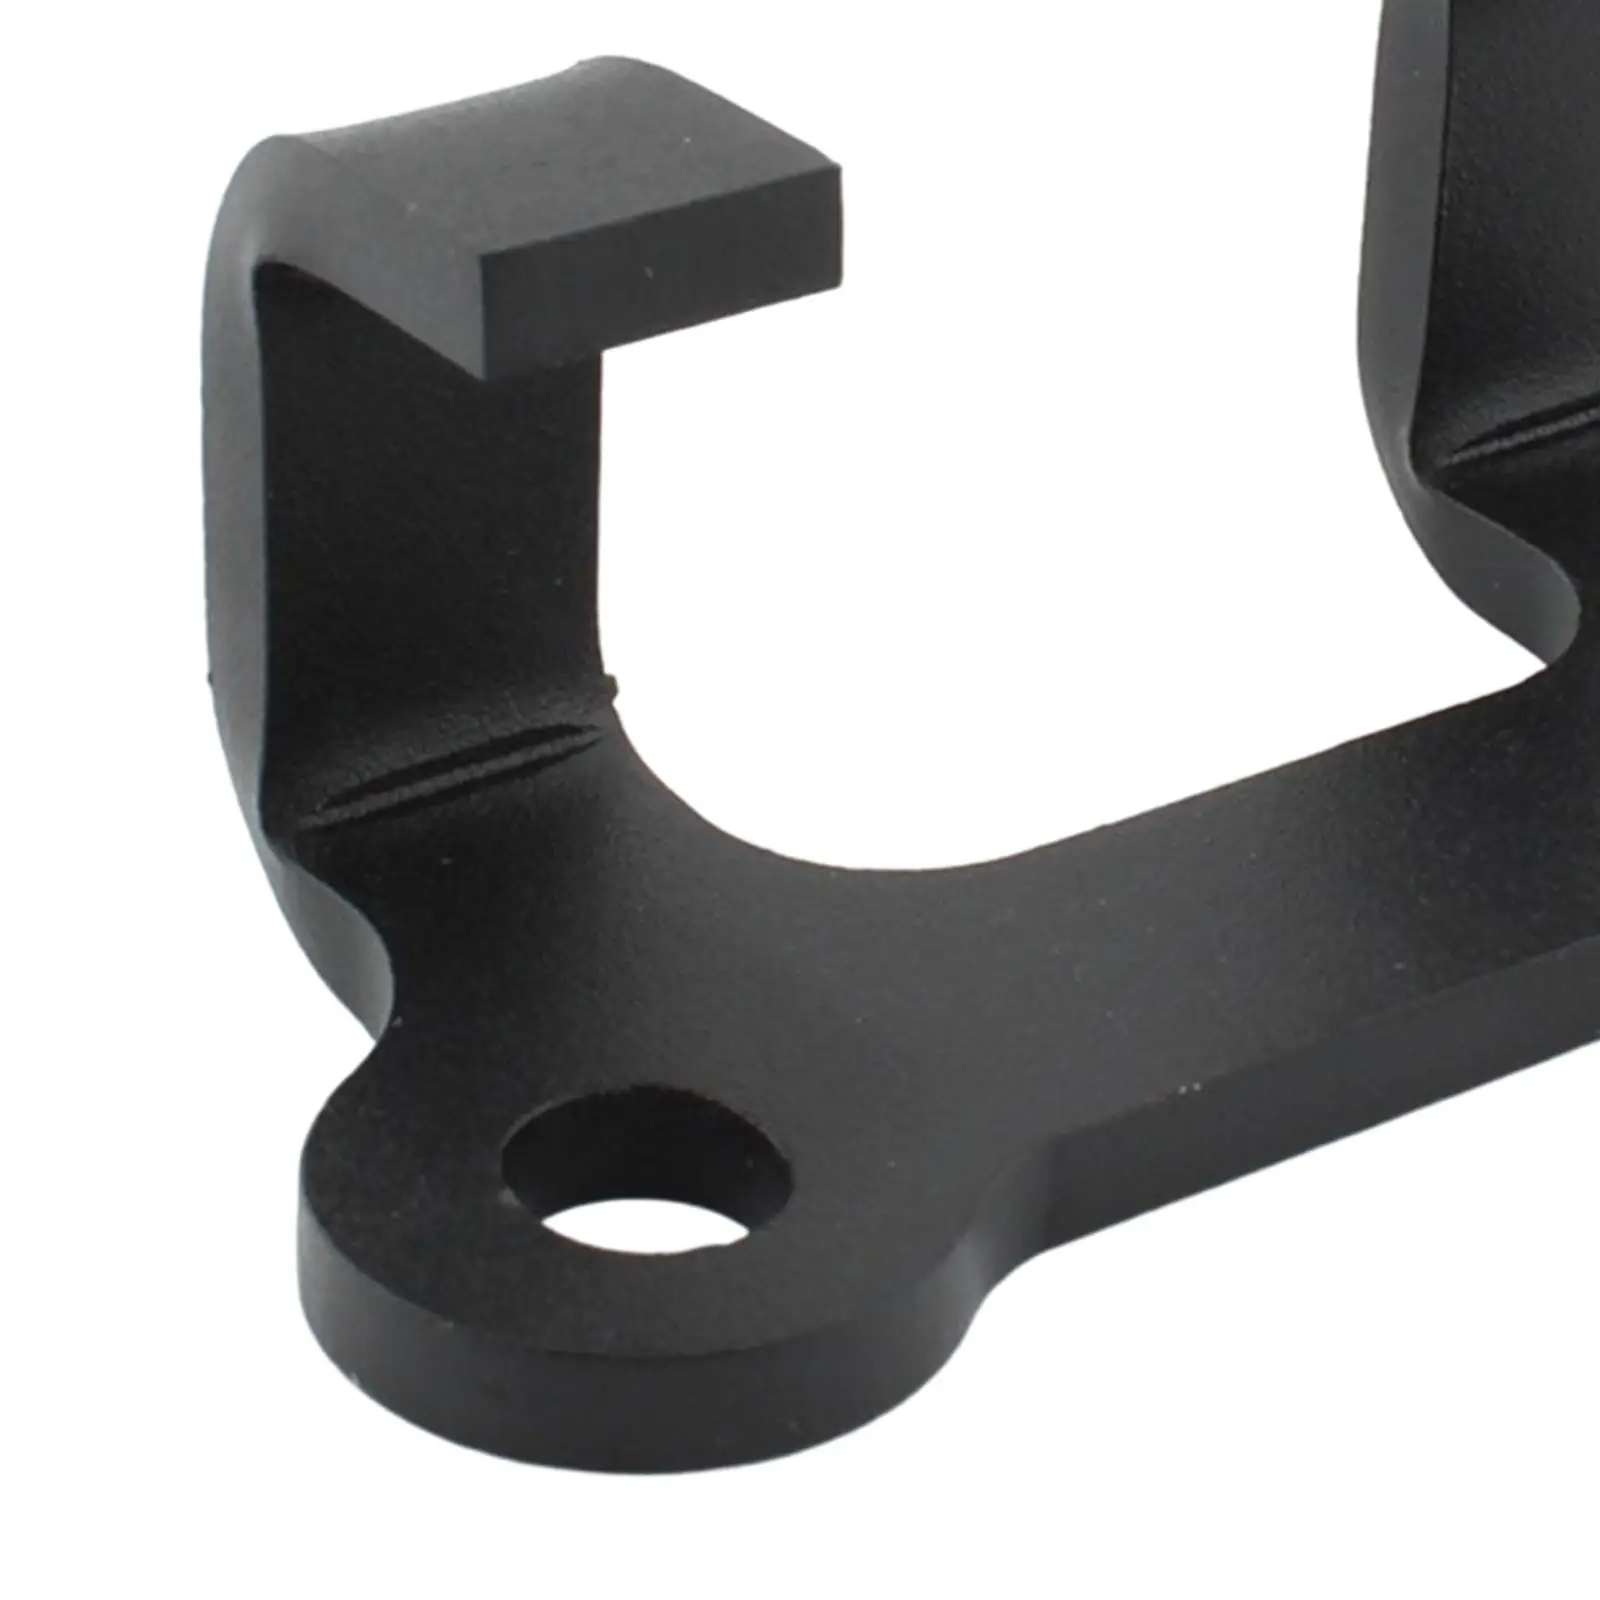 Motorbike Headlight Lamp Mount Bracket, Black Aluminum Alloy Mounting Support for GB350 CB350 High Quality Replacement.